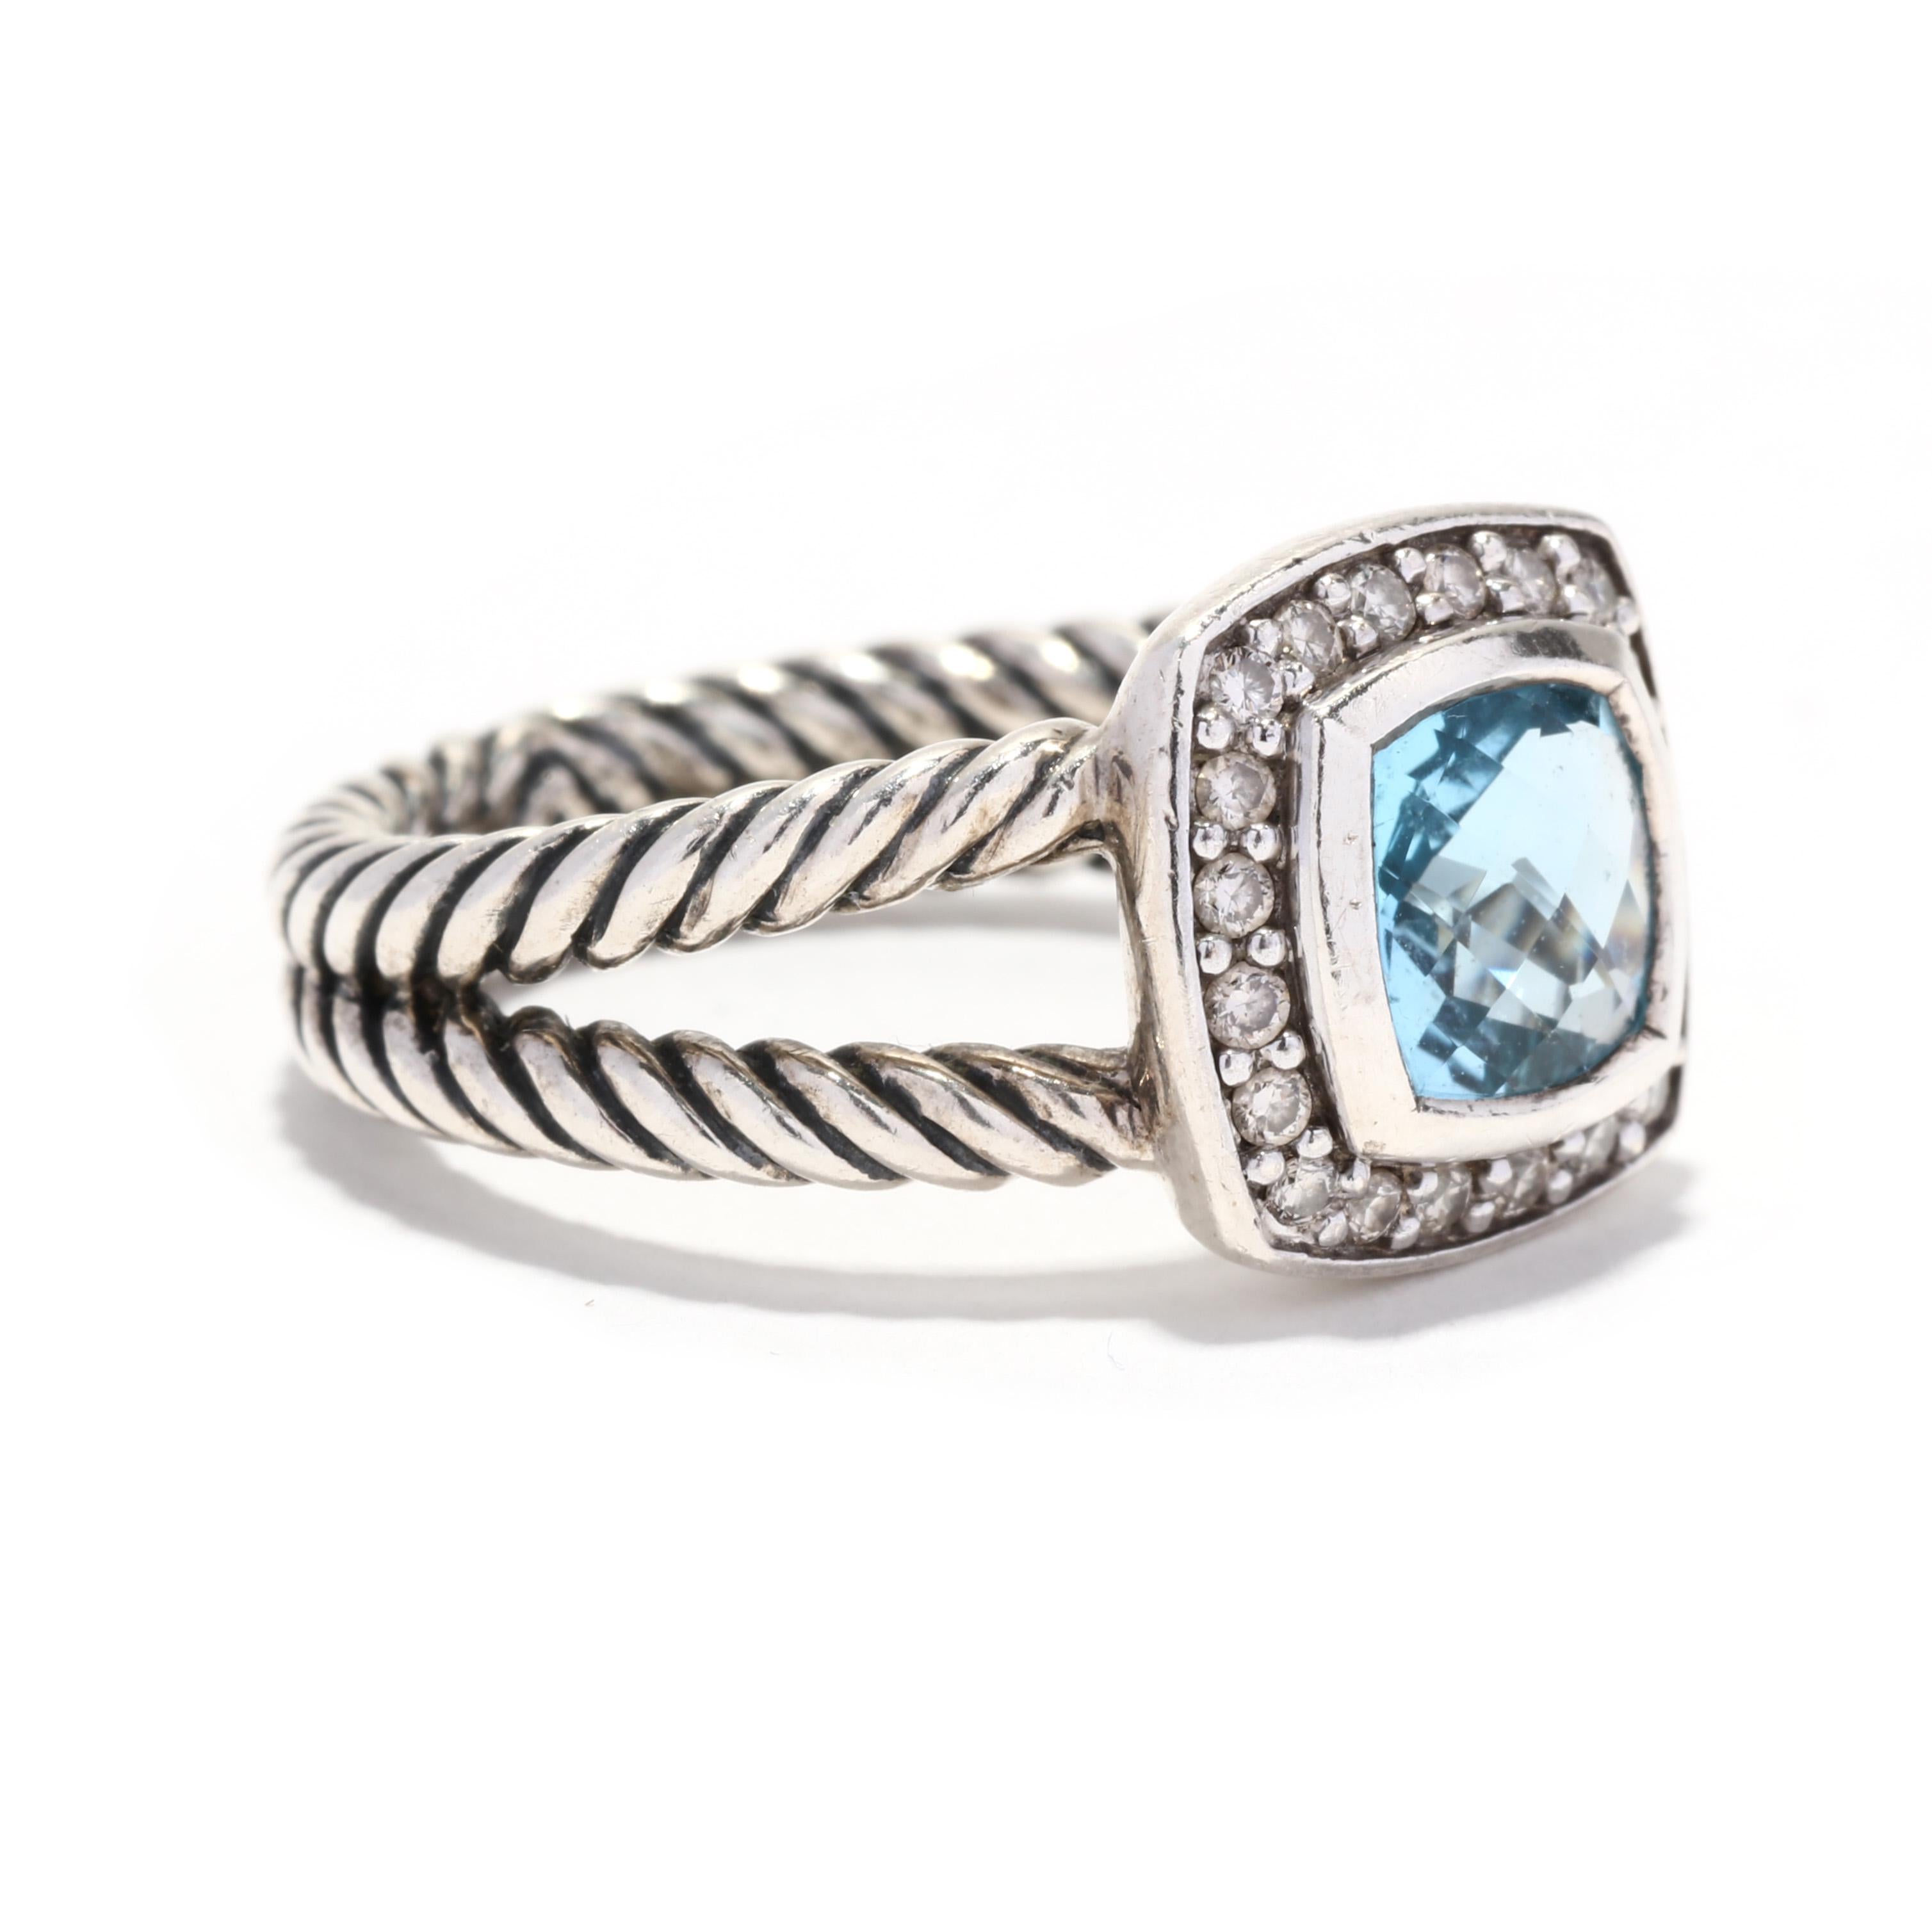 A vintage David Yurman sterling silver blue topaz and diamond albion ring. This November birthstone ring features a bezel set, cushion checkerboard blue topaz weighing approximately 1.83 carats surrounded by a halo of round brilliant cut diamonds